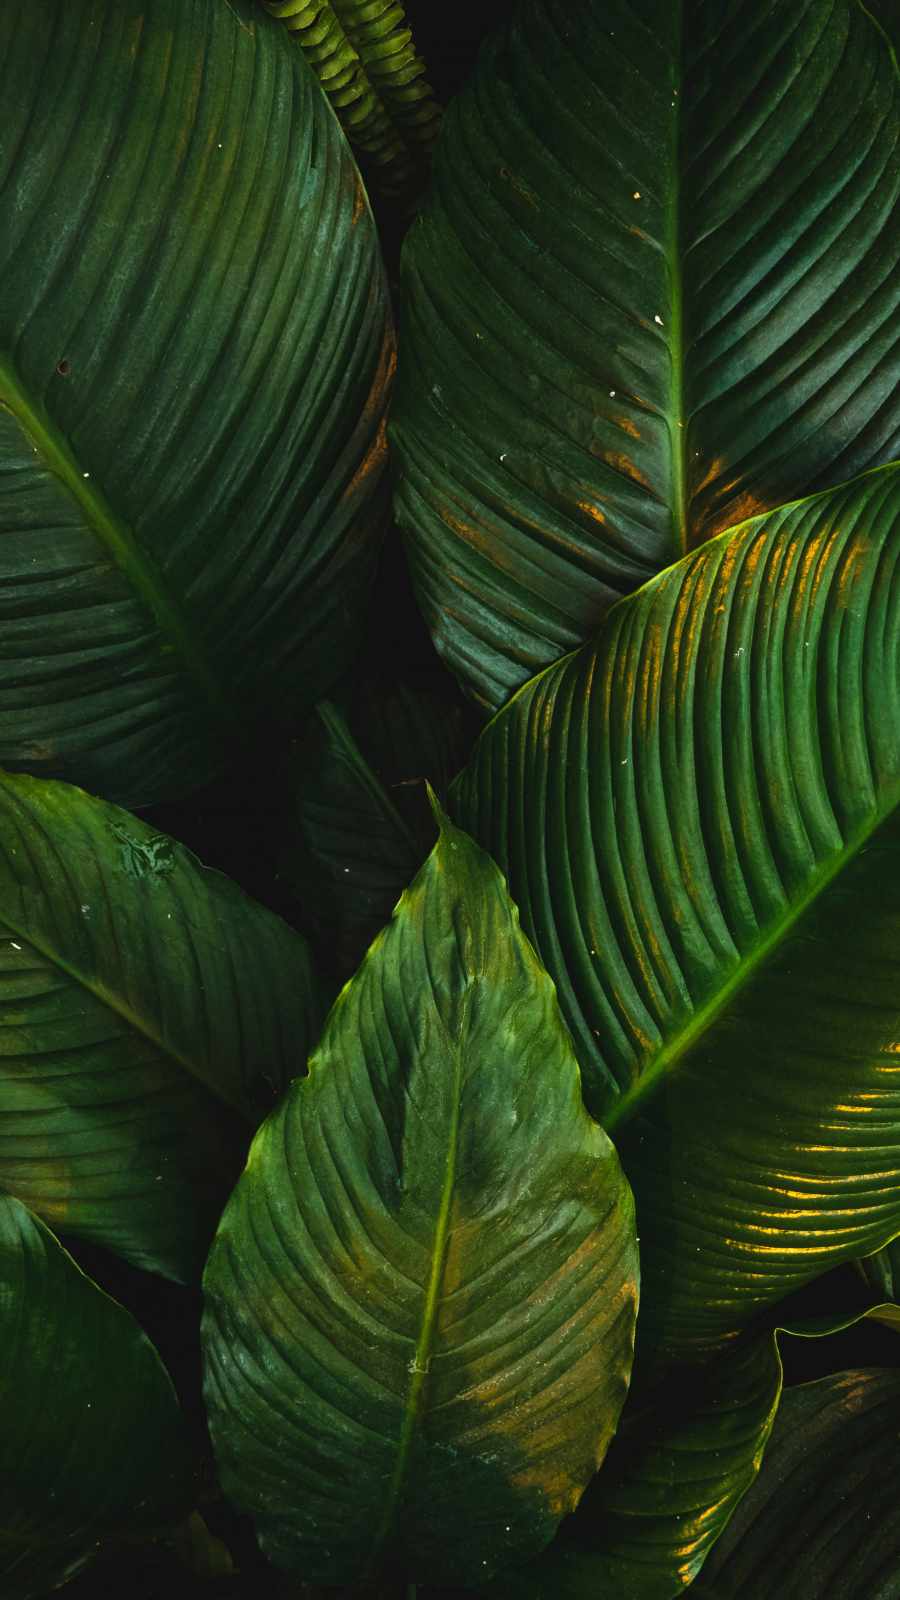 Large Green Leaves IPhone Wallpaper HD  IPhone Wallpapers